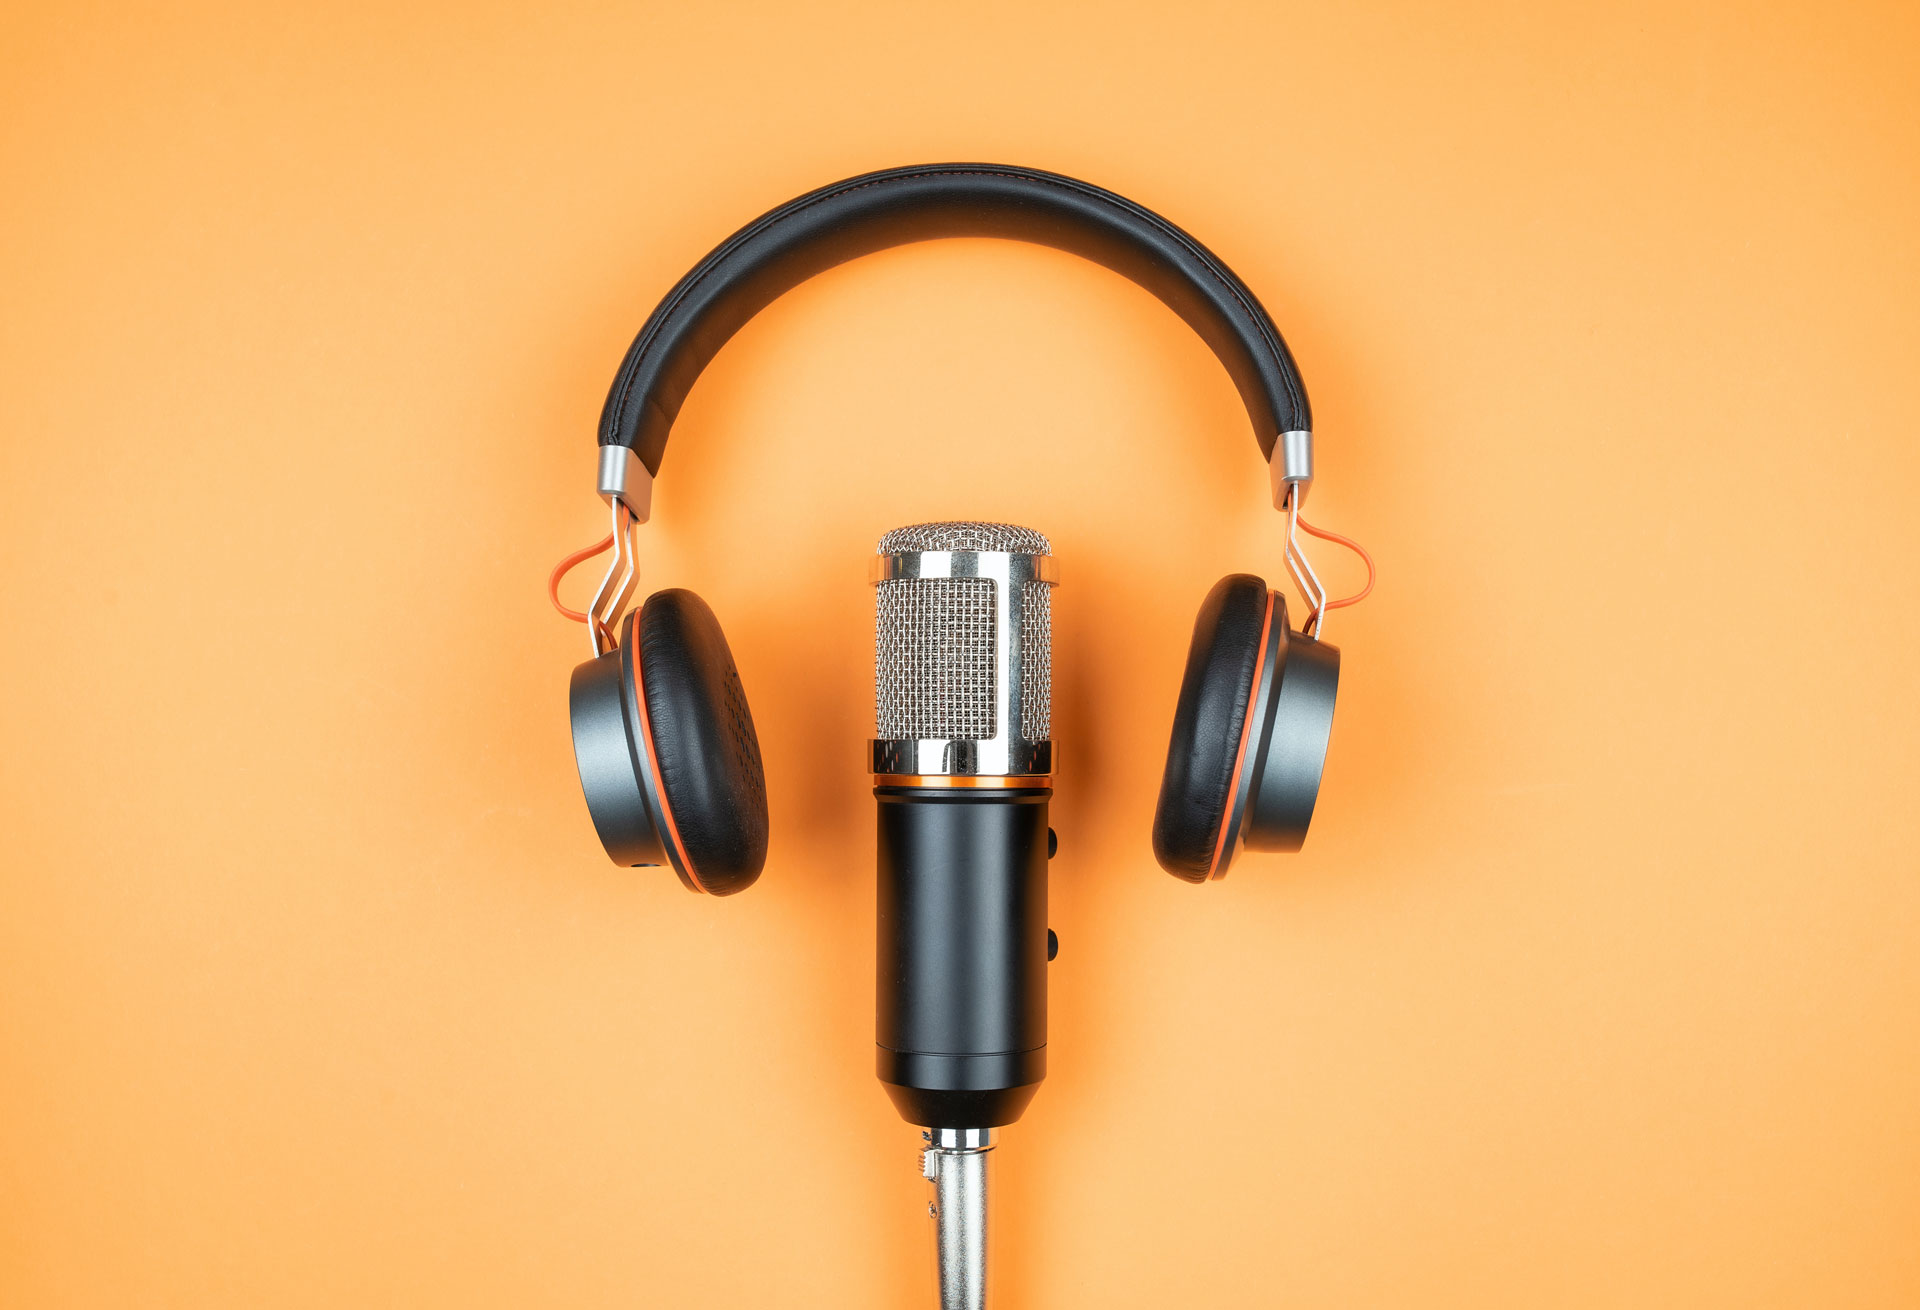 Podcast microphone and headphones on a light orange background.